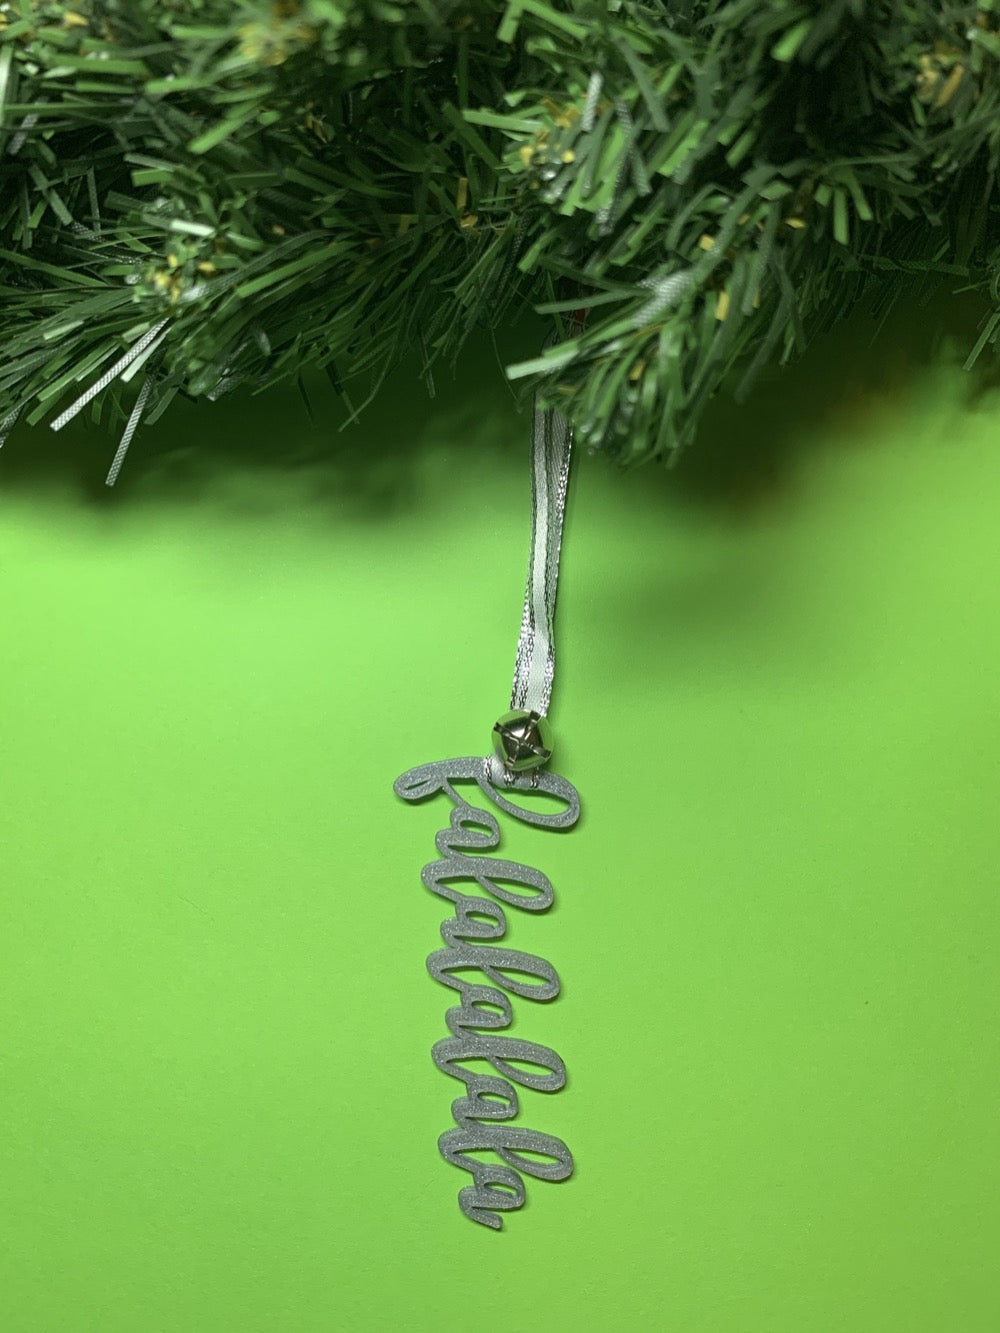 On a bright green background and hanging from a green wreath is a 3D printed R+D ornament. It is a cursive text with a jingle bell and covered in glitter to make it shimmer and shine in the light. This ornament reads, falalalala.